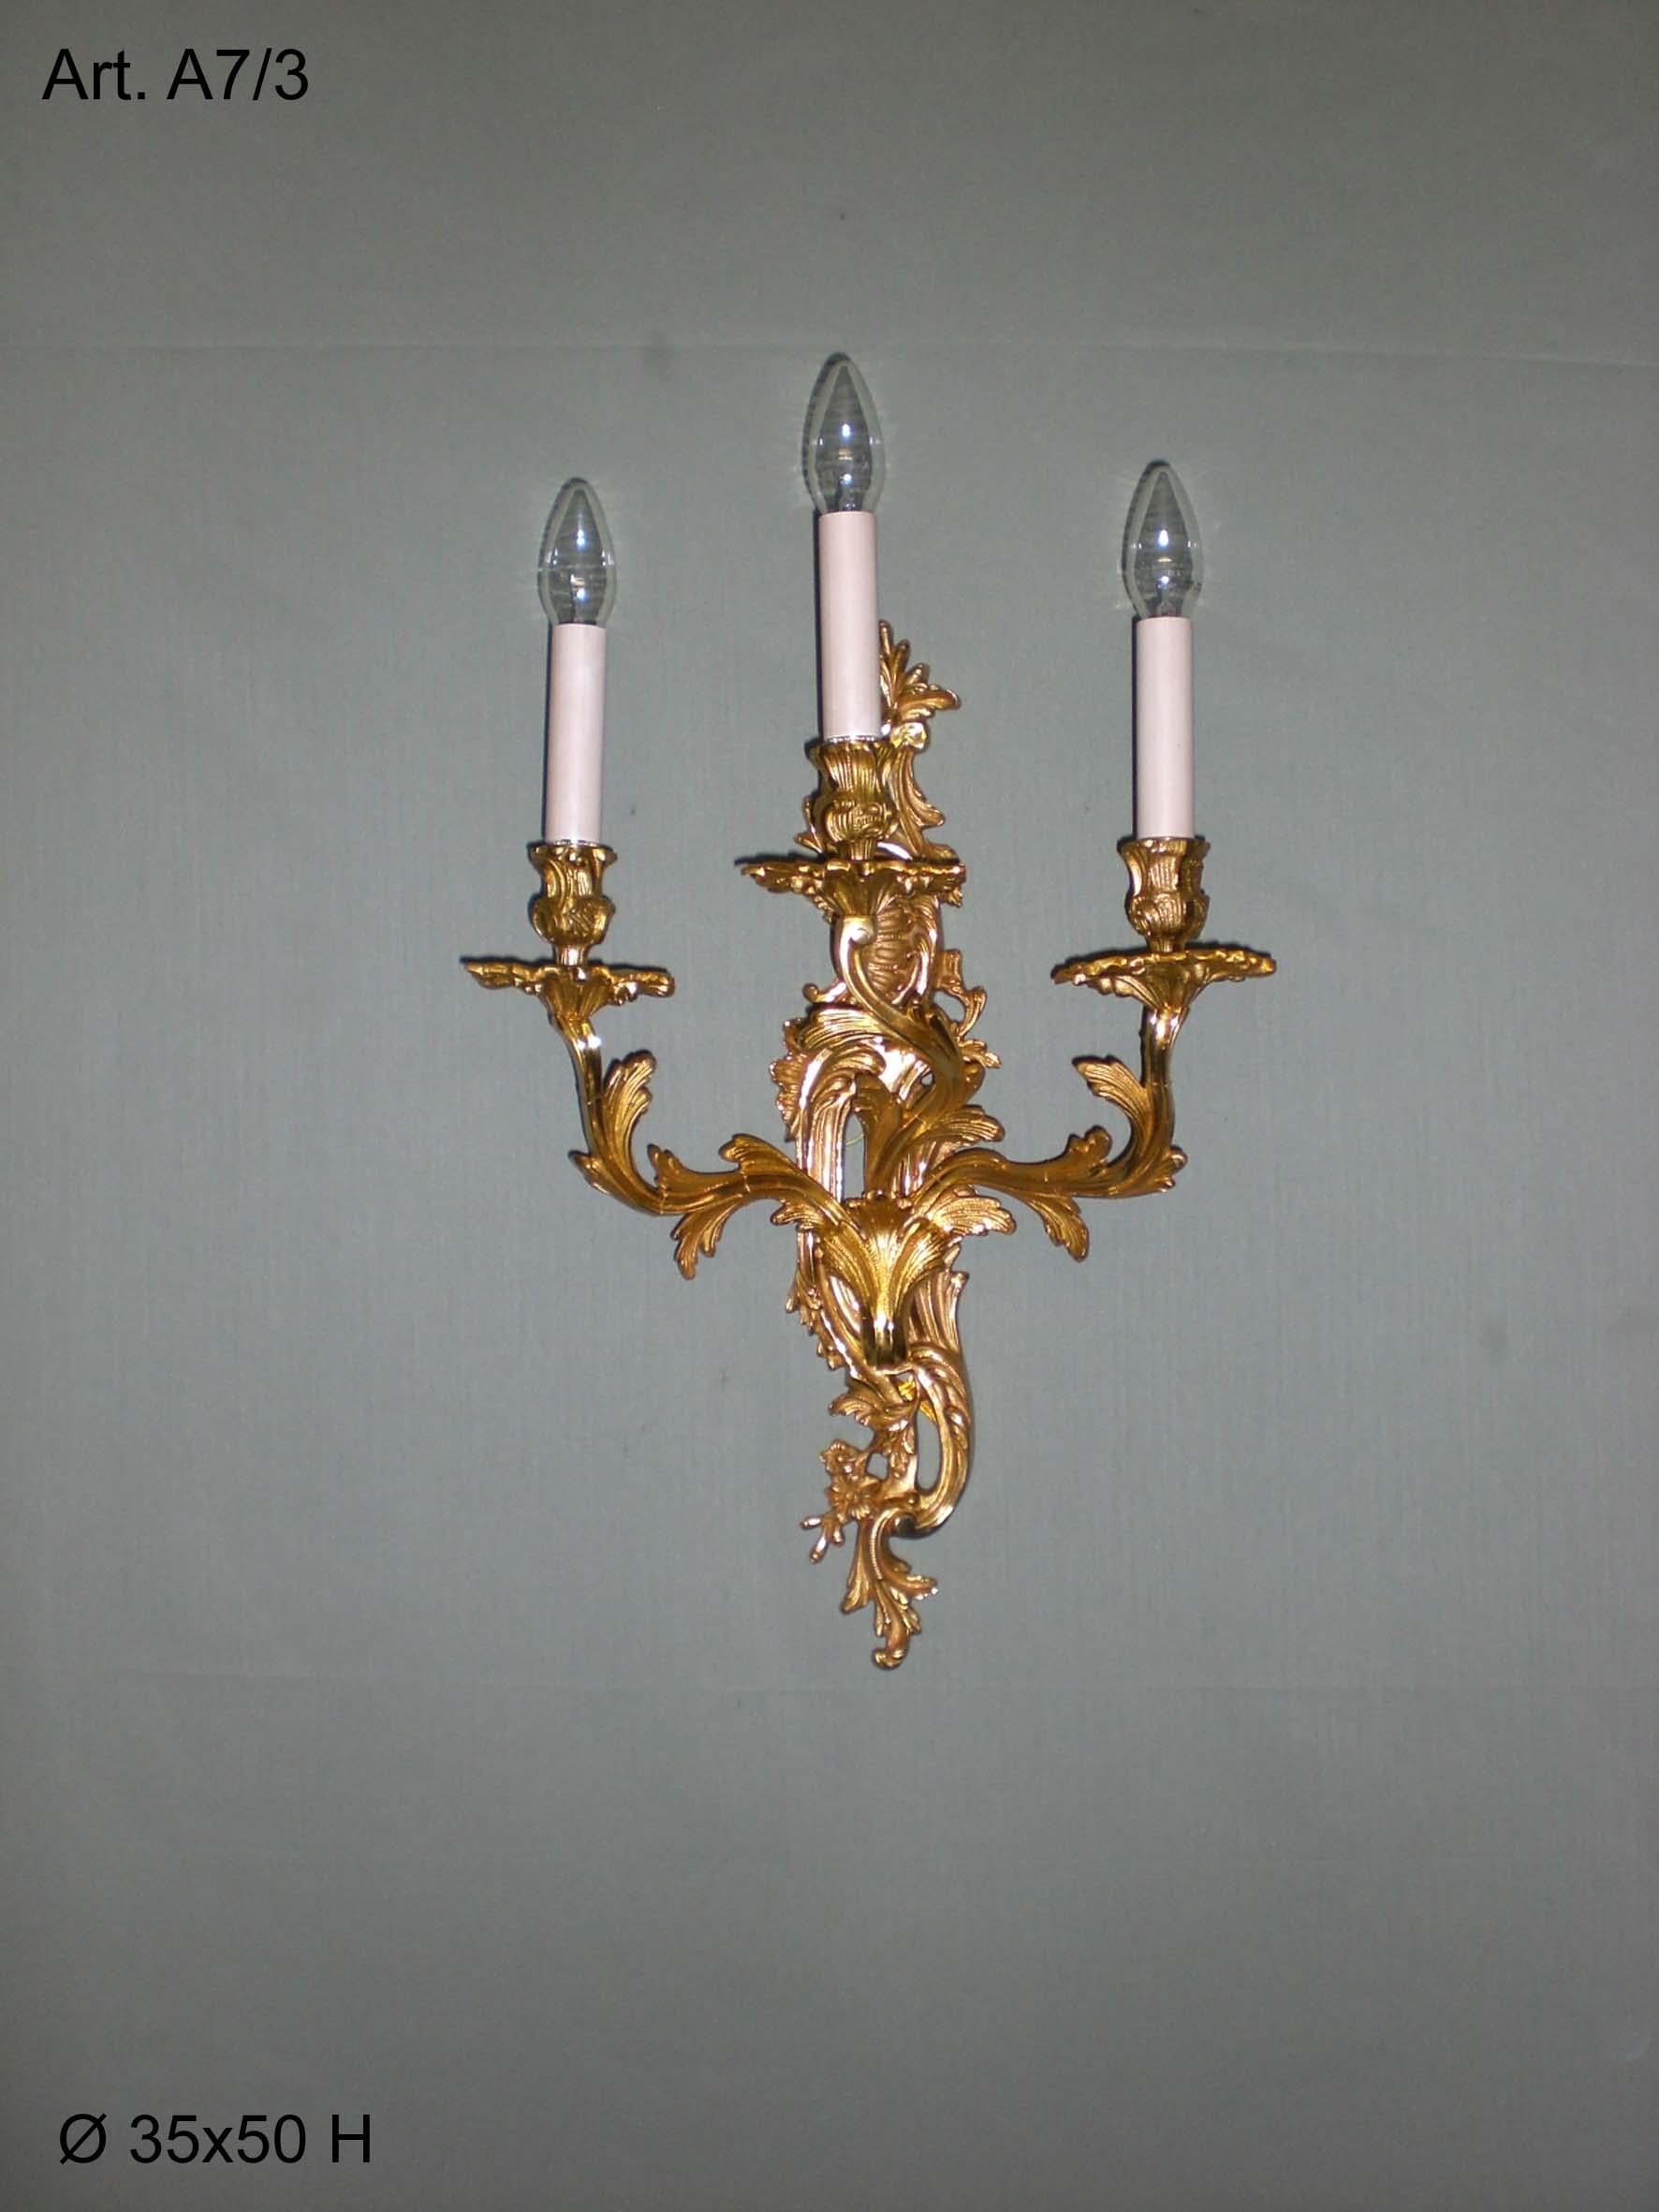 This Louis XV style gilt bronze wall sconce by Gherardo Degli Albizzi is beautifully cast in the traditional manner with all the sumptuous movement of the Rococo period, having three arms issuing from the plate and adorned with acanthus leaves and